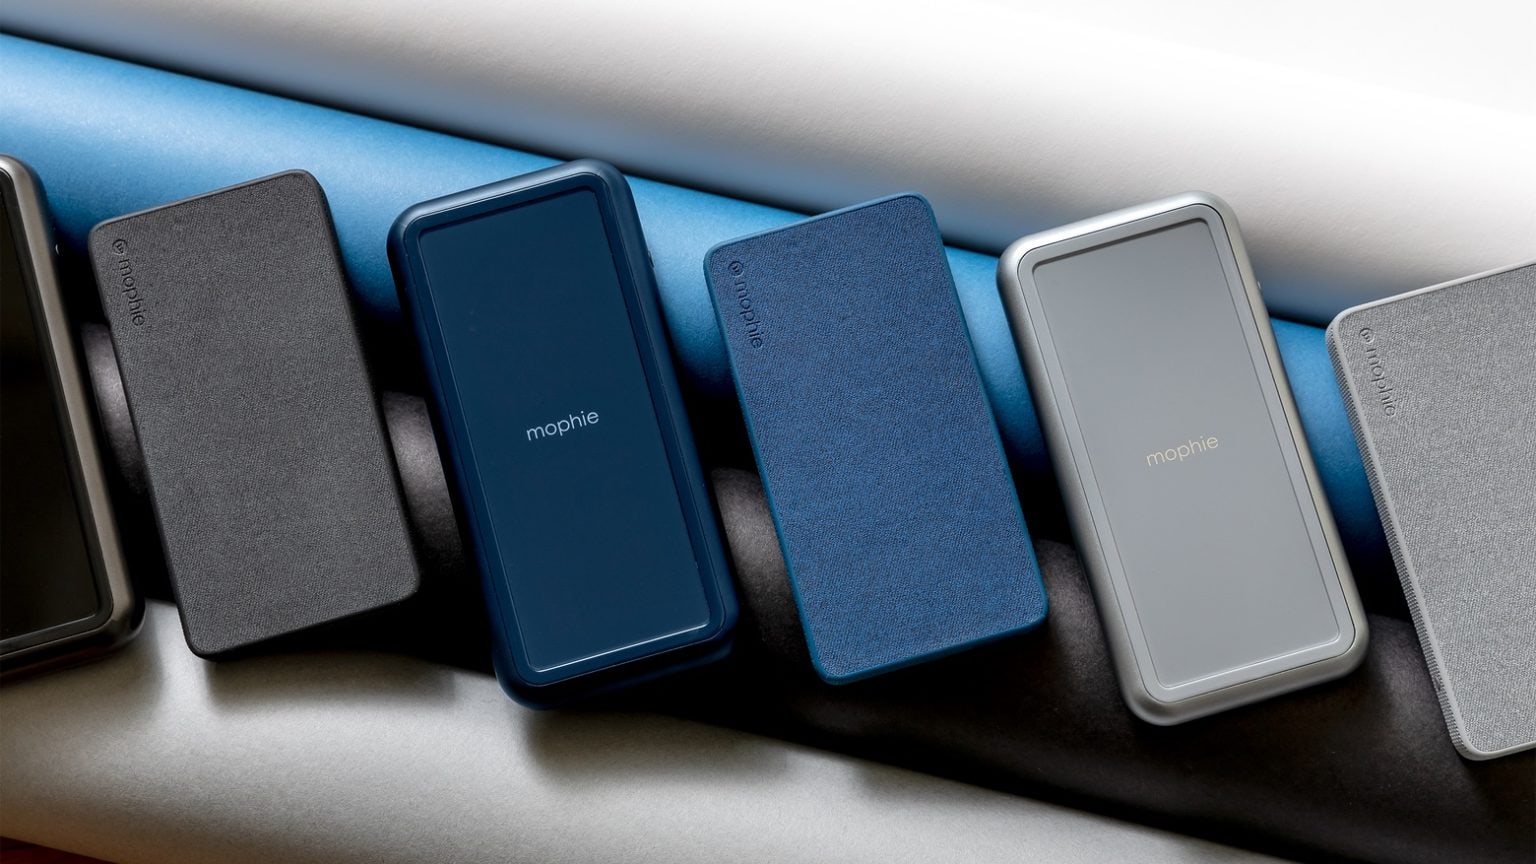 The Mophie Powerstation lineup for 2020.